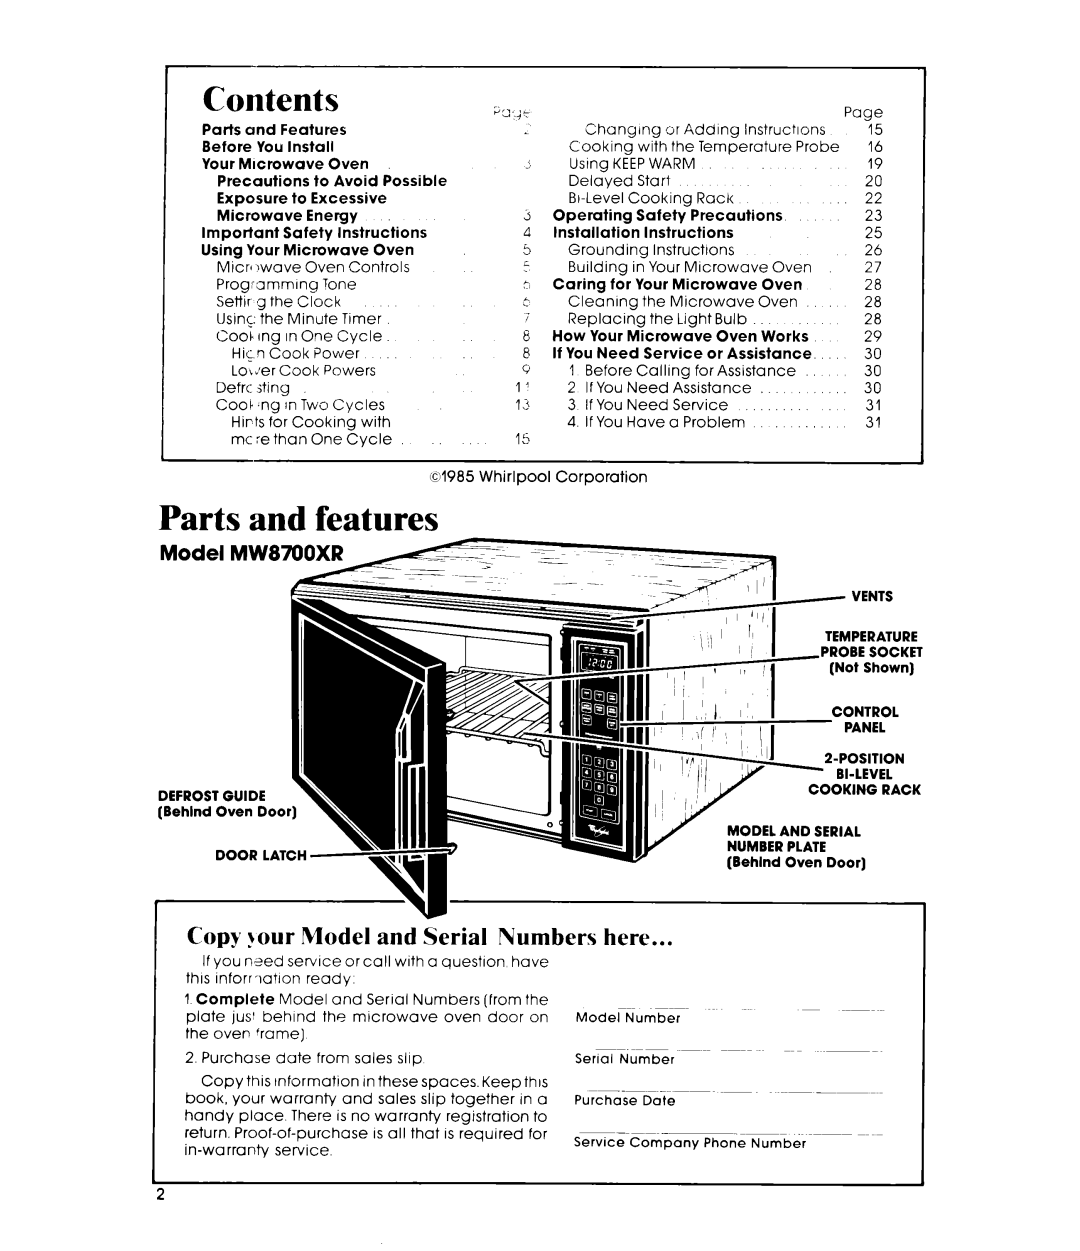 Whirlpool MW8700XR manual Contents?x,. c, Parts and features, Copy !our Model and Serial Numbers here, MW87OOXR 